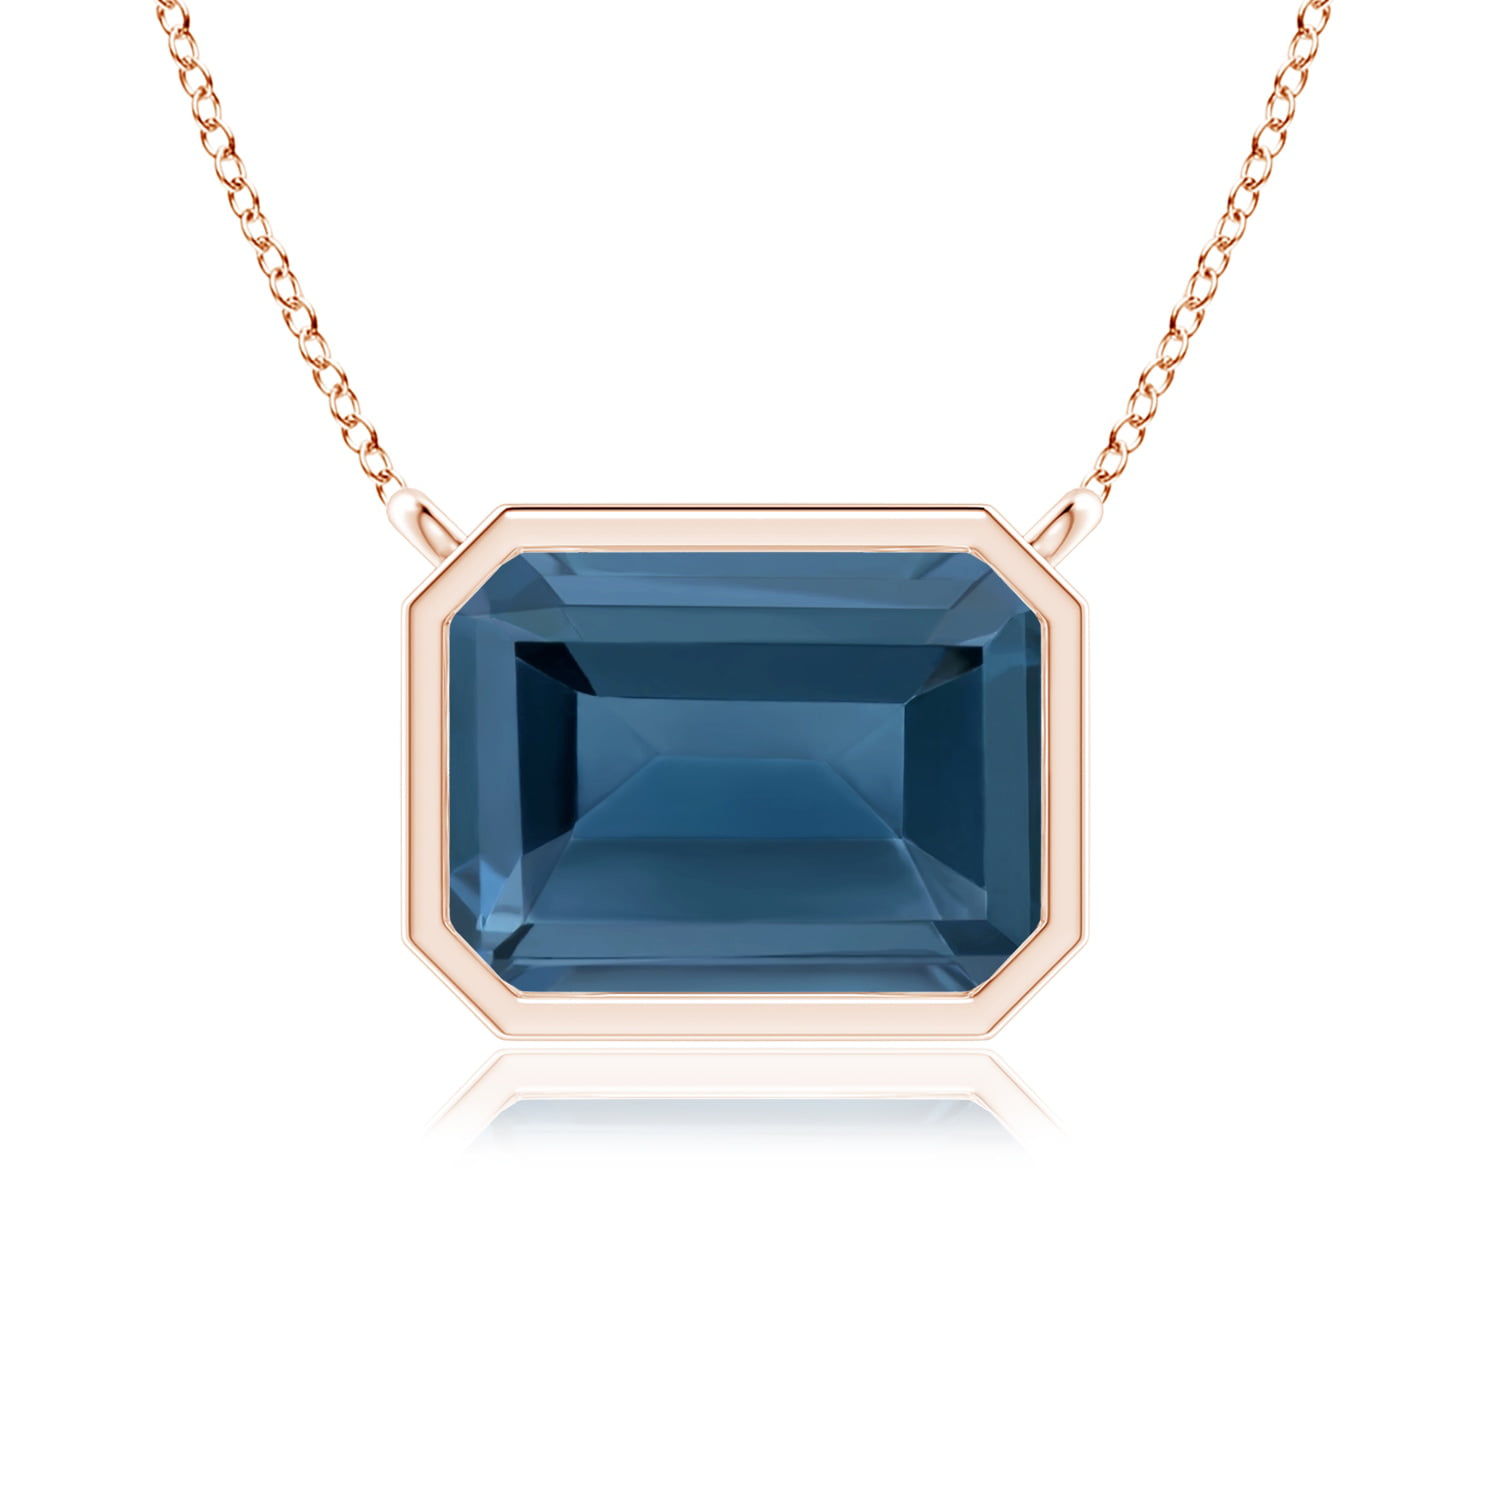 4.50 CT Emerald Cut Topaz Pendant With Chain Necklace in 14k Rose Gold Finish